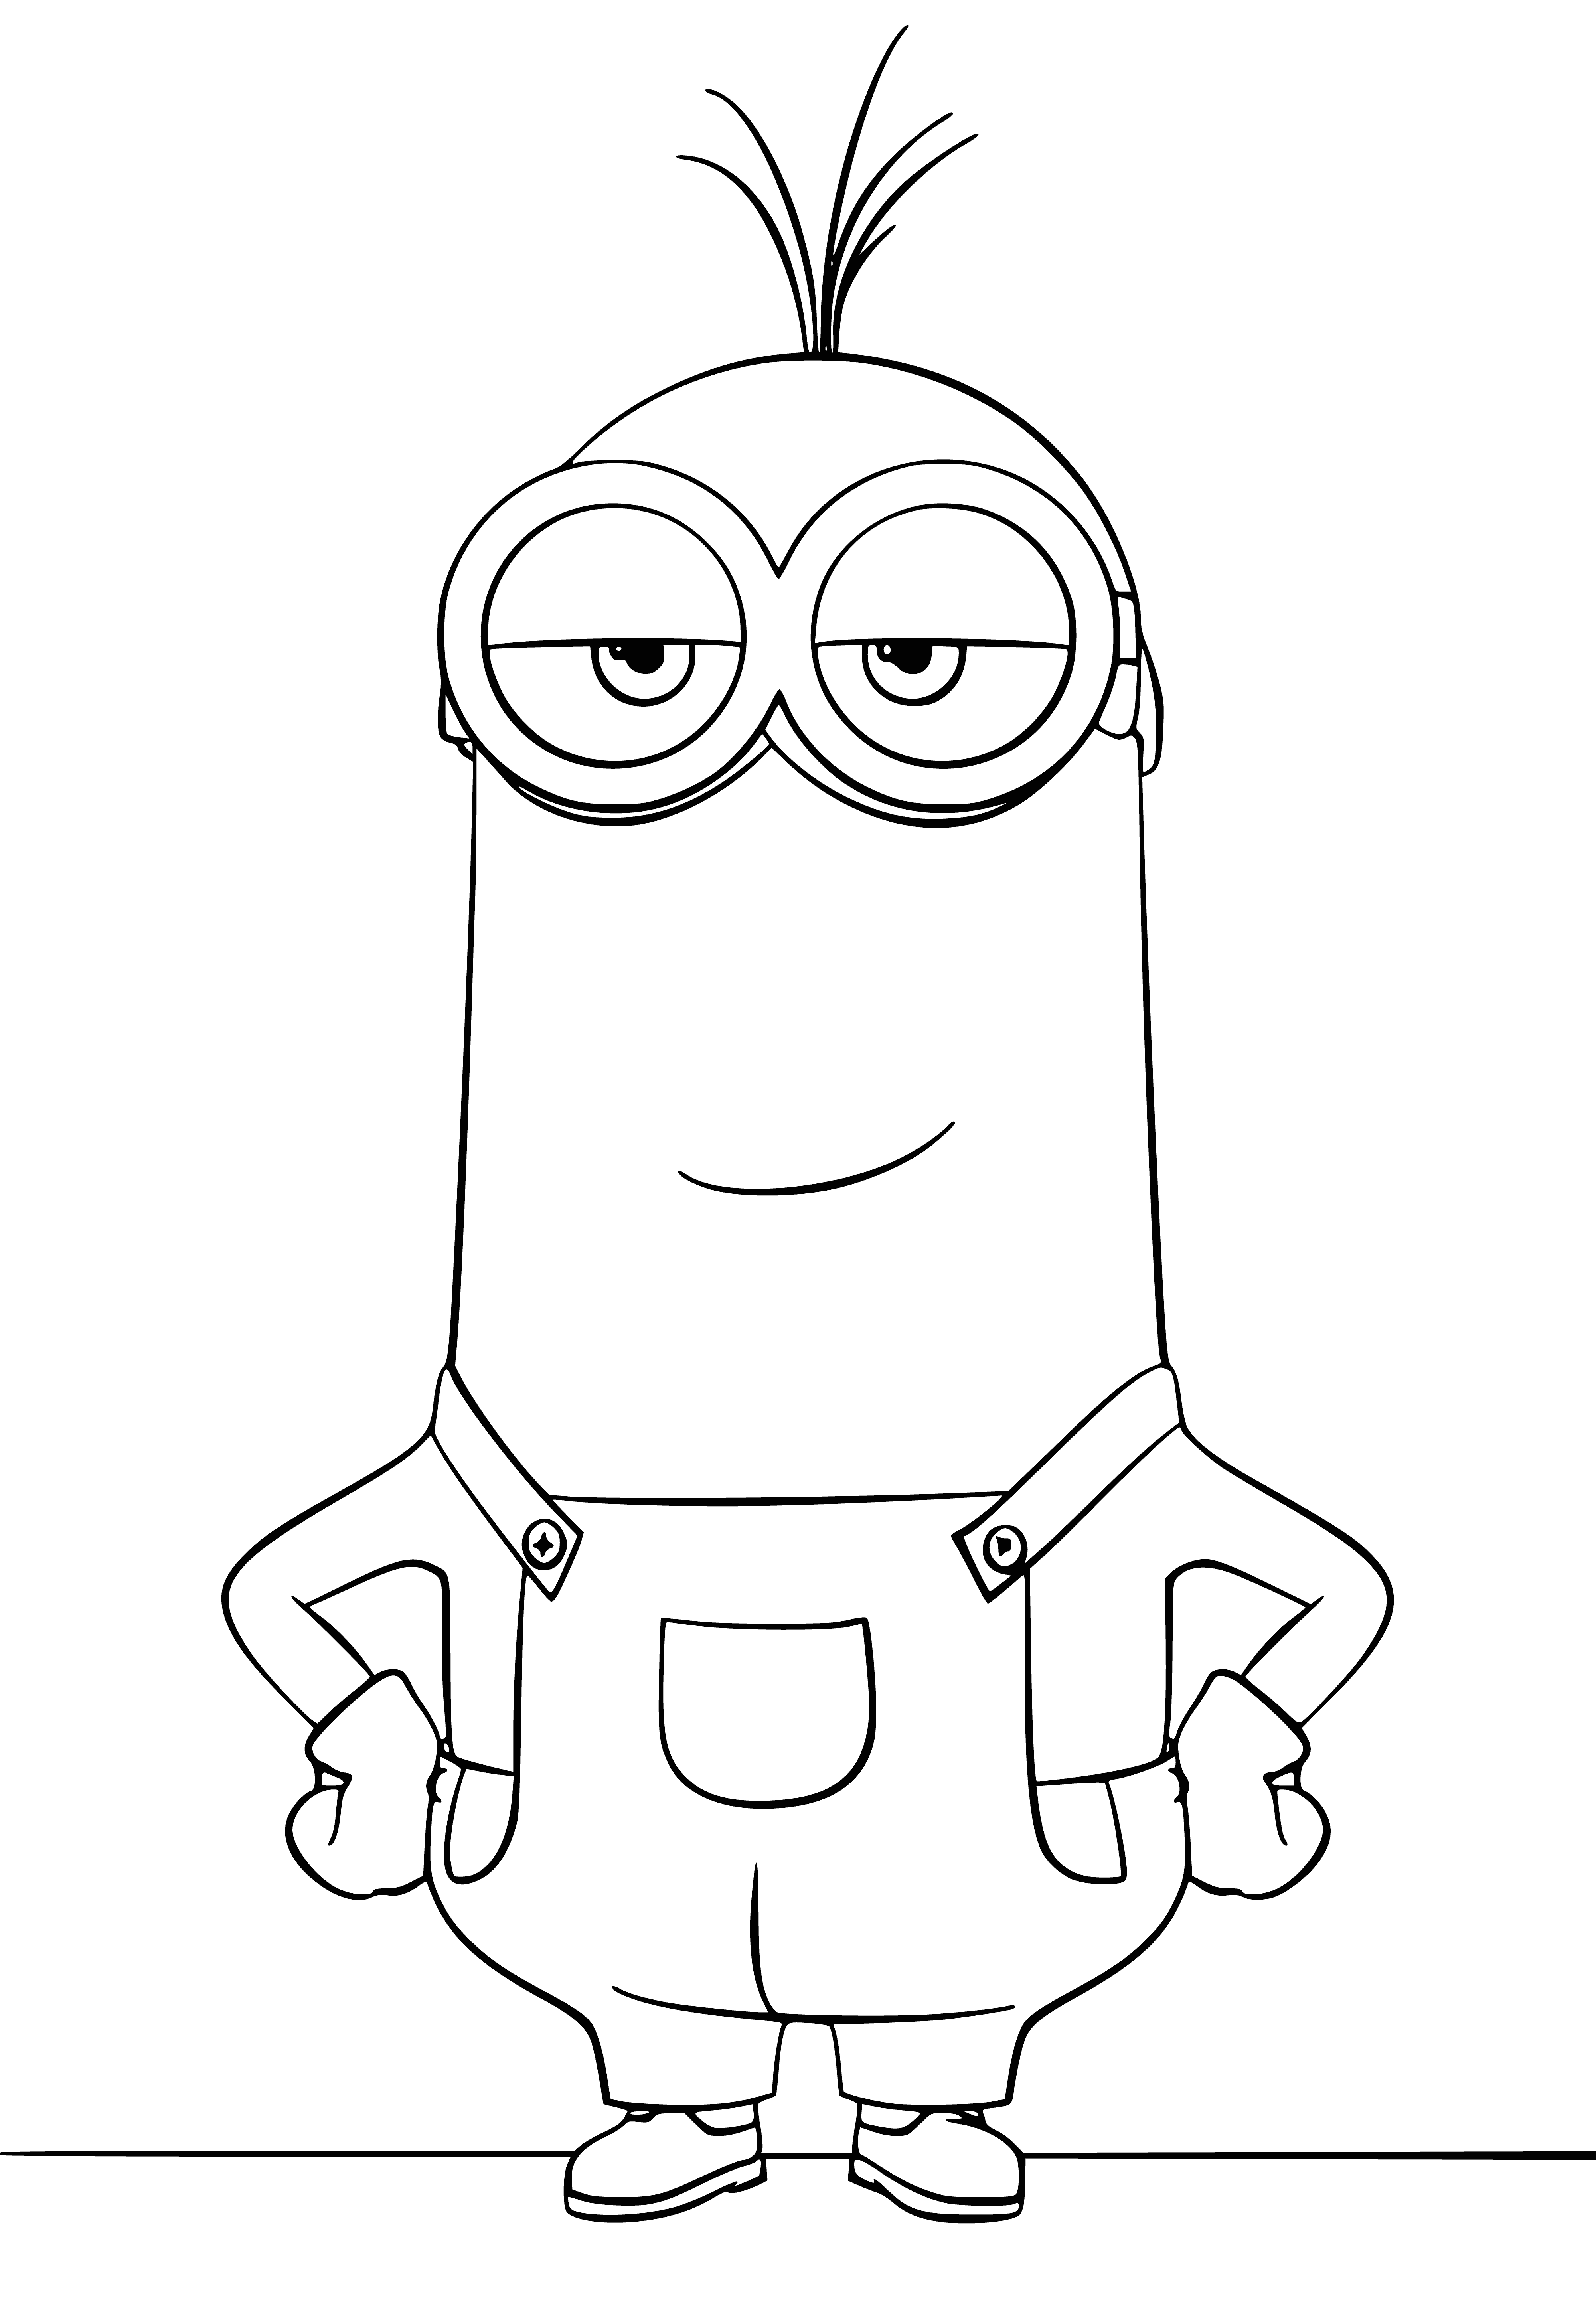 coloring page: A minion named Kevin with two eyes, blue overalls, yellow skin, bald head and a banana in his left hand.